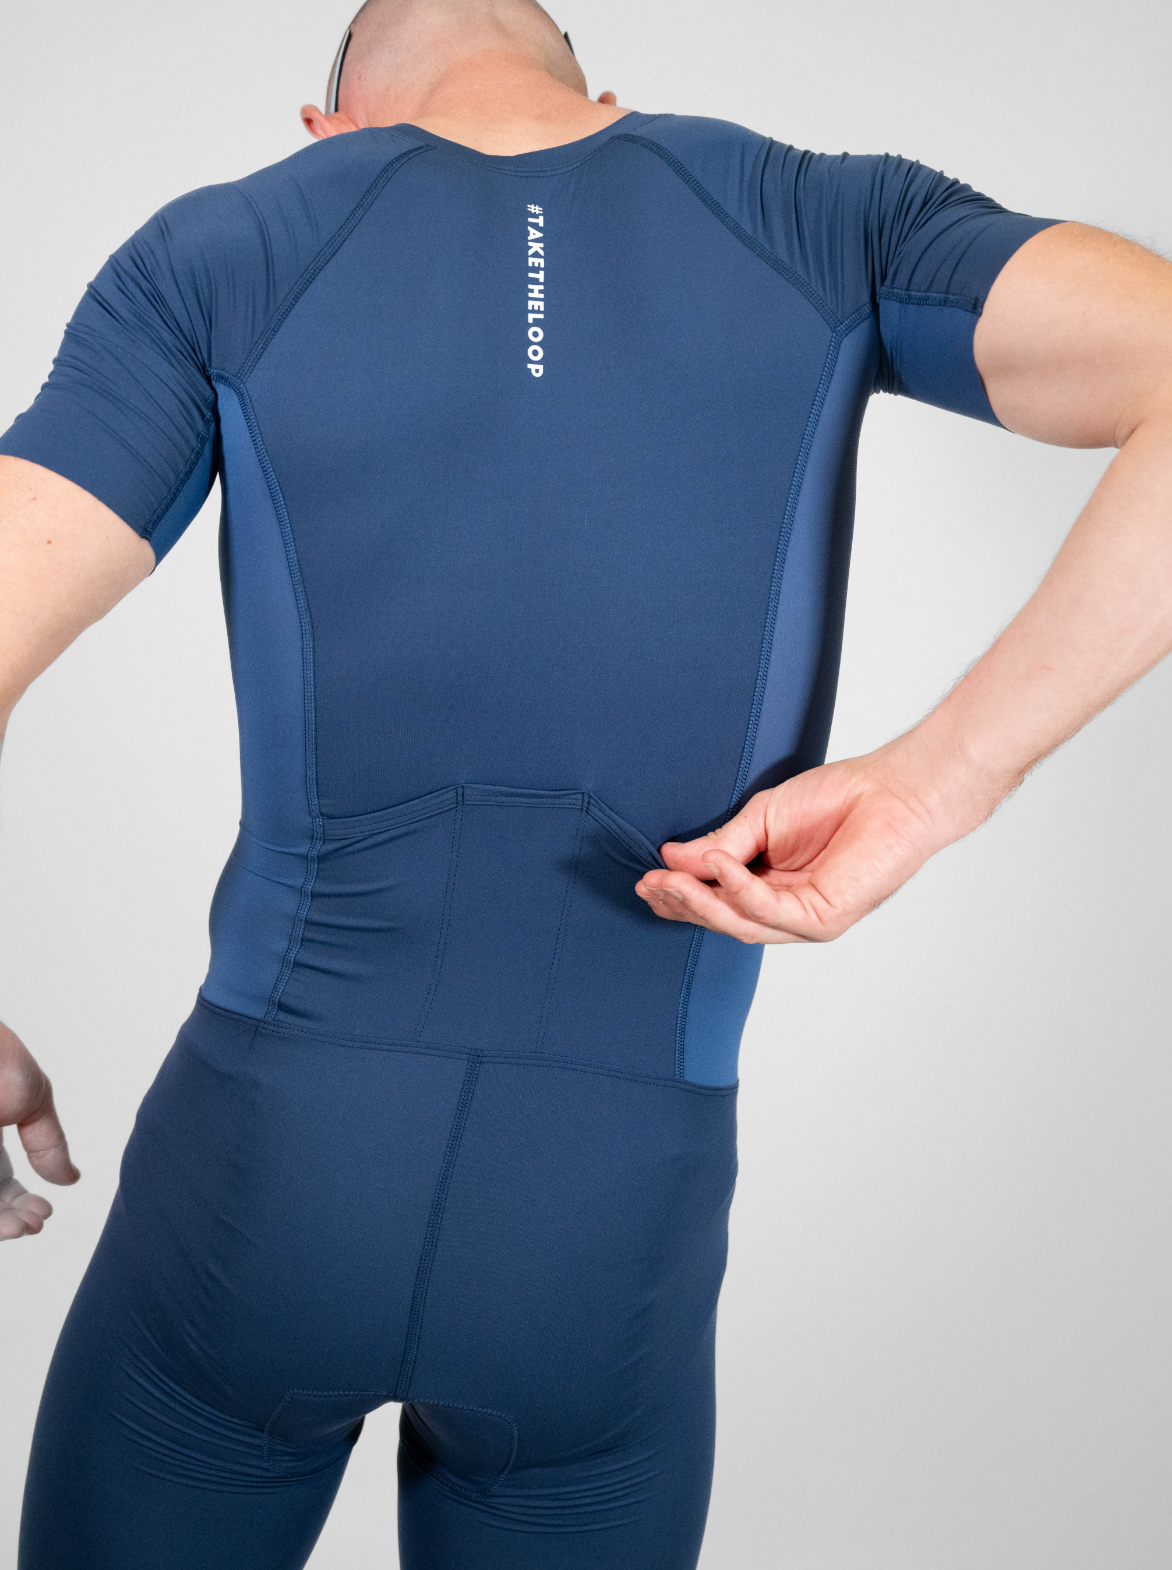 Trisuit recycled and Made in France — TOULON